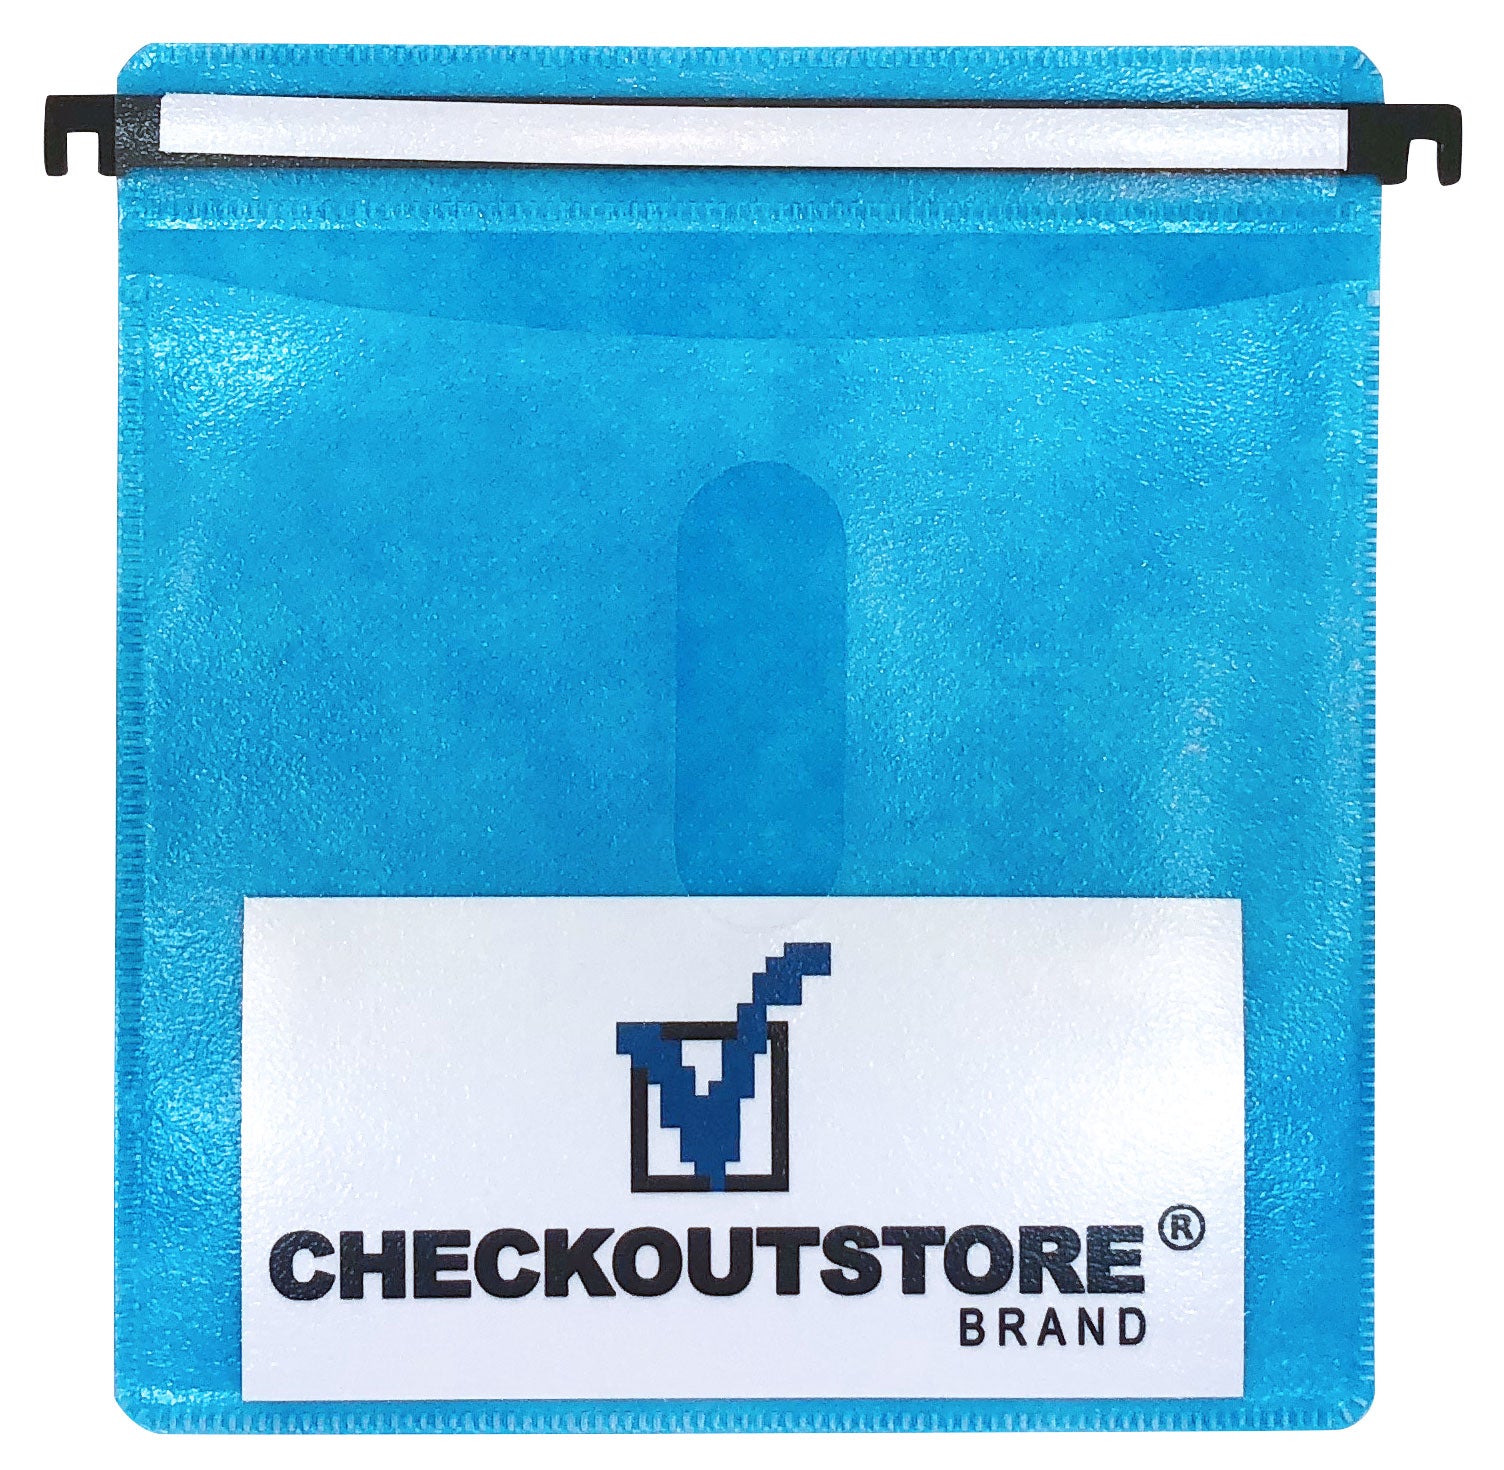 100 CheckOutStore® CD Double-sided Refill Plastic Hanging Sleeve - Blue